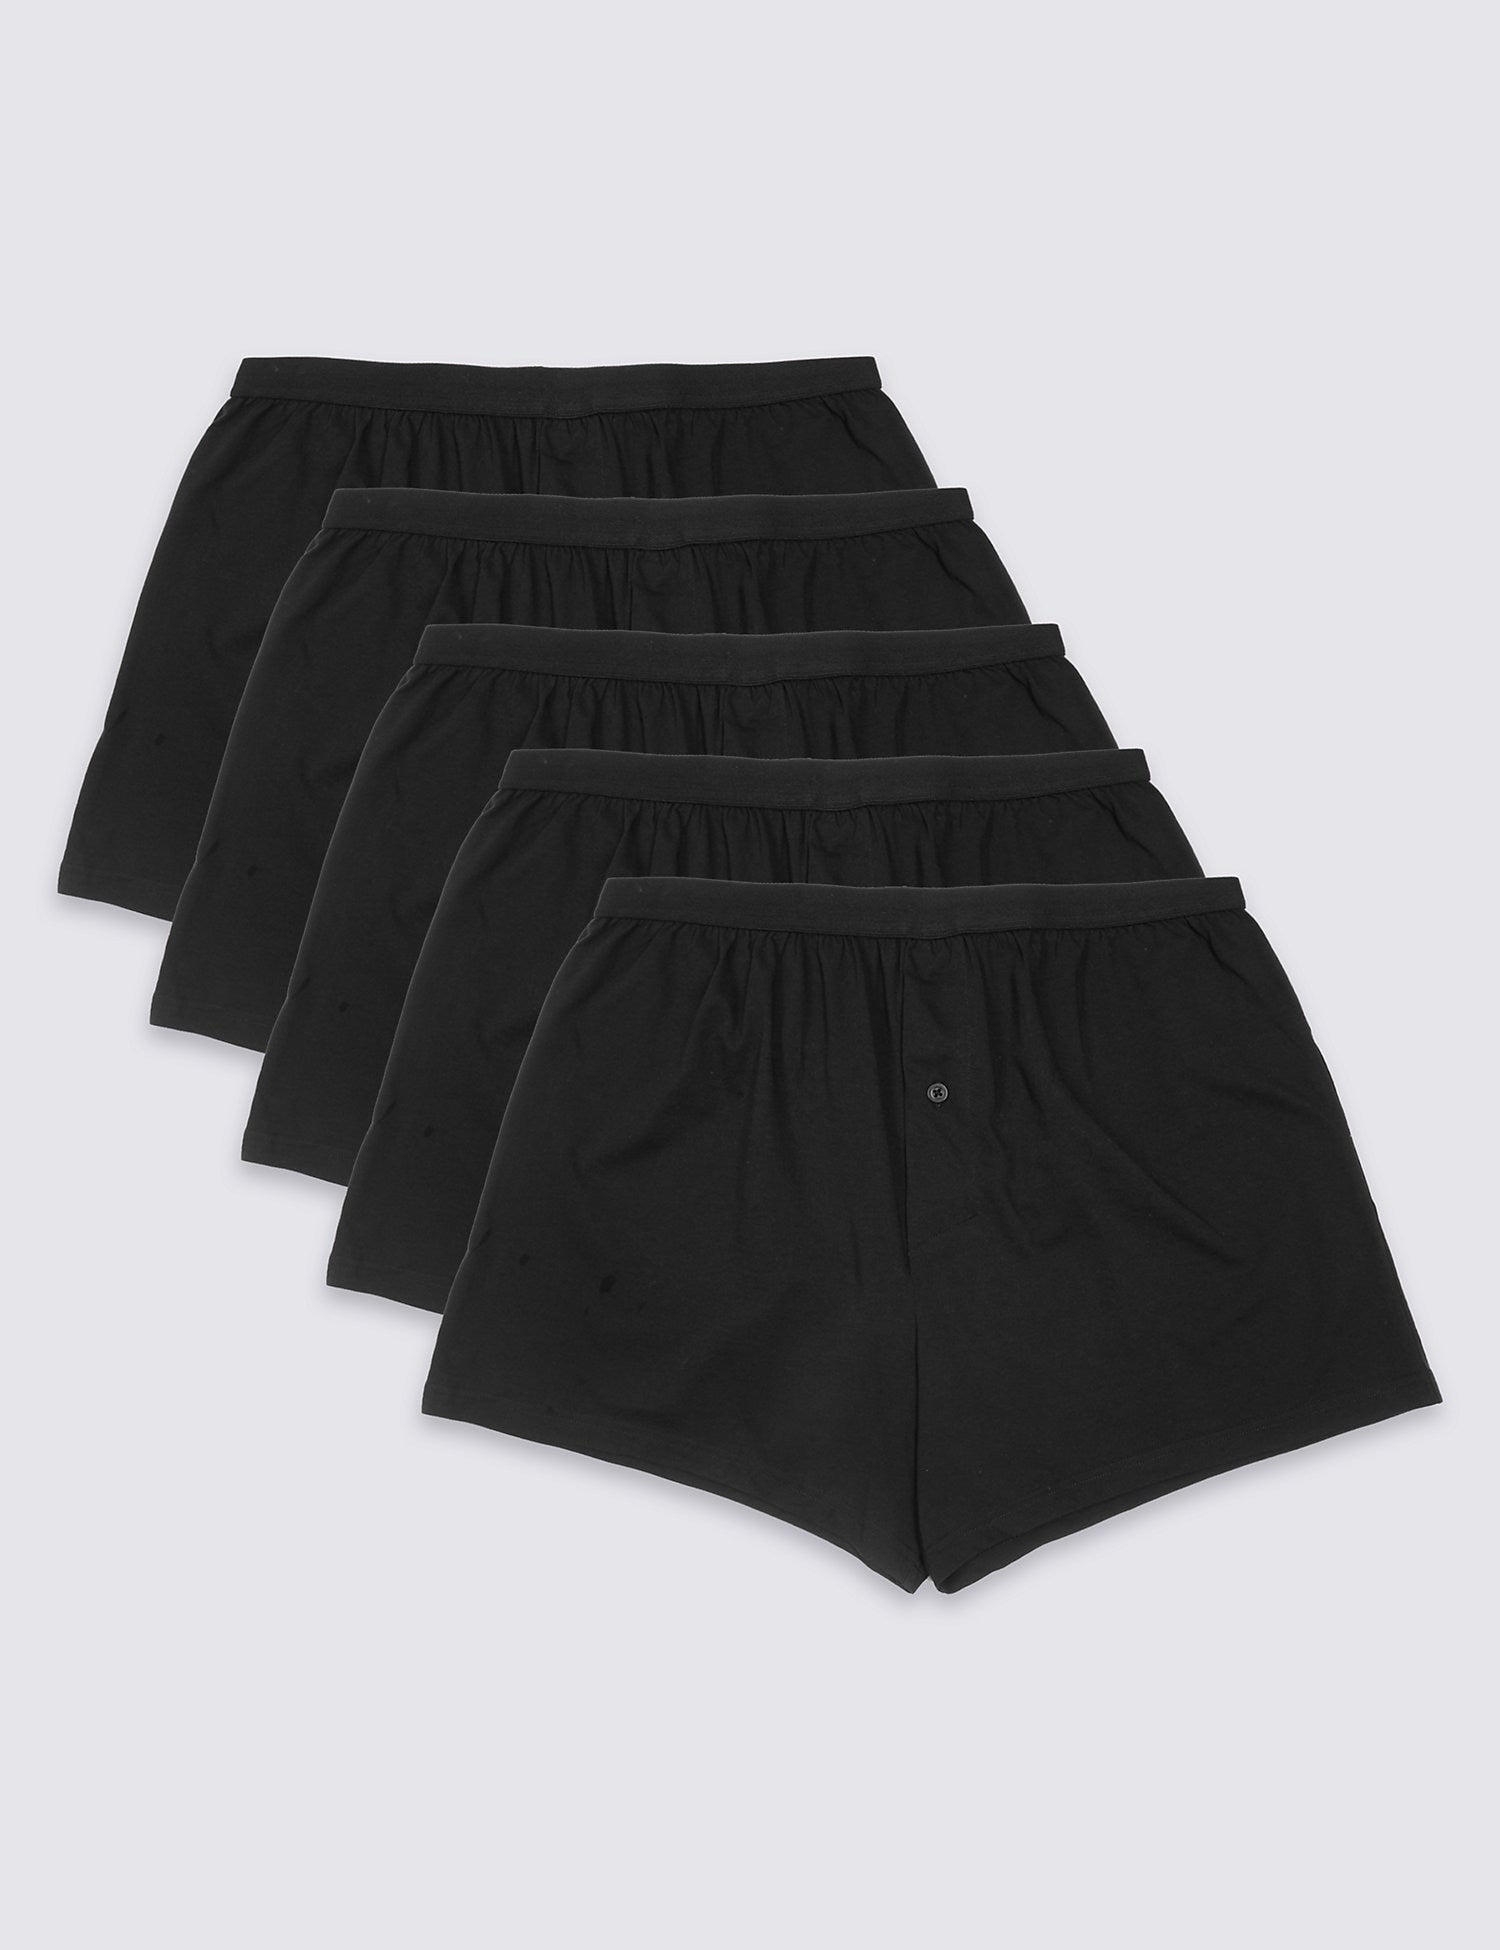   Essentials Men's Cotton Jersey Boxer Short (Available in  Big & Tall), Pack of 5, Black, X-Small : Clothing, Shoes & Jewelry